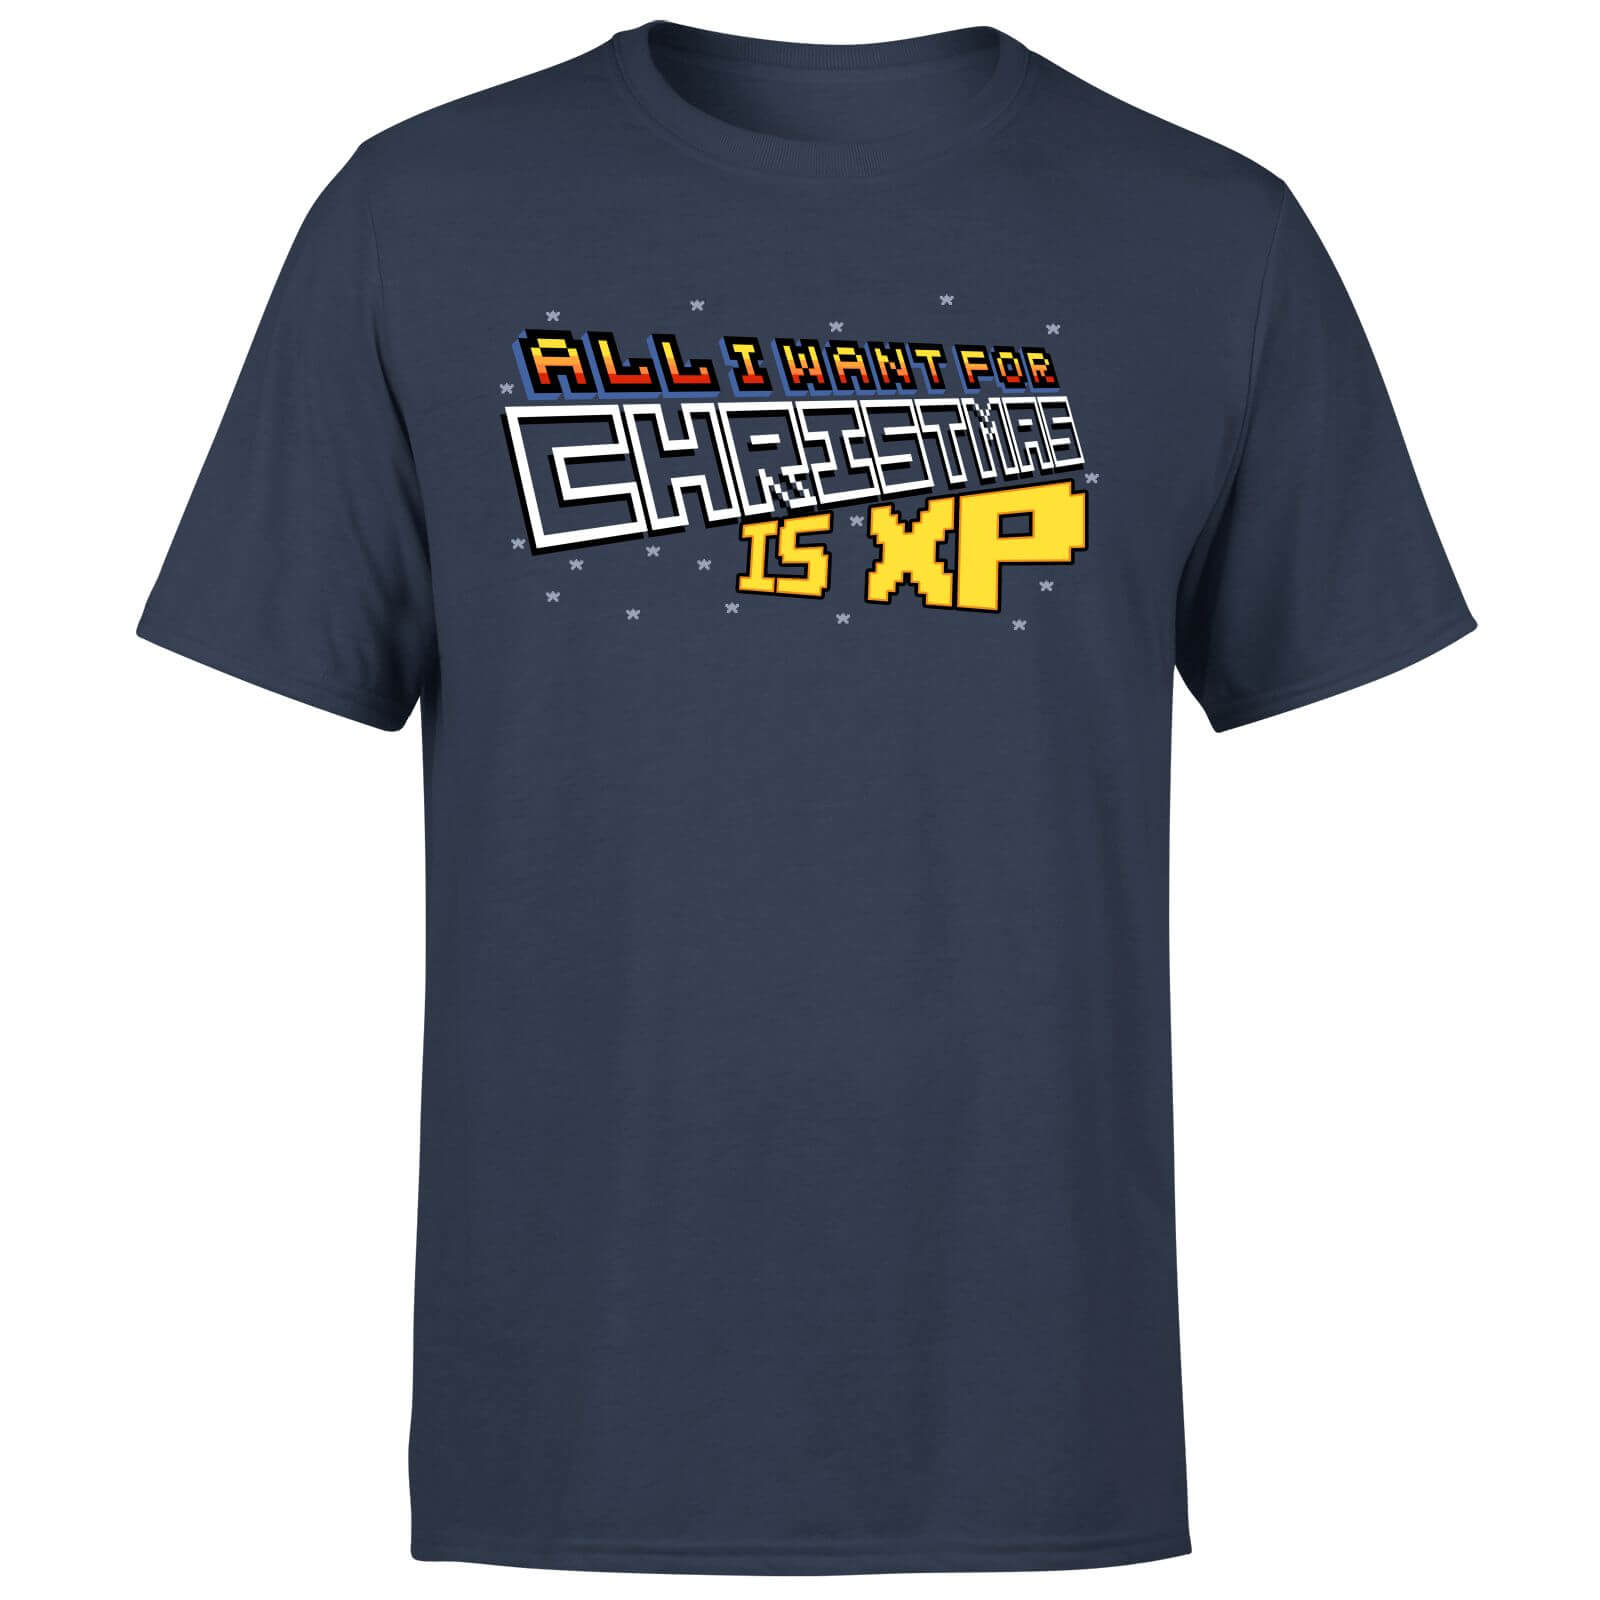 All I Want For Xmas Is XP T-Shirt - Navy - S - Navy